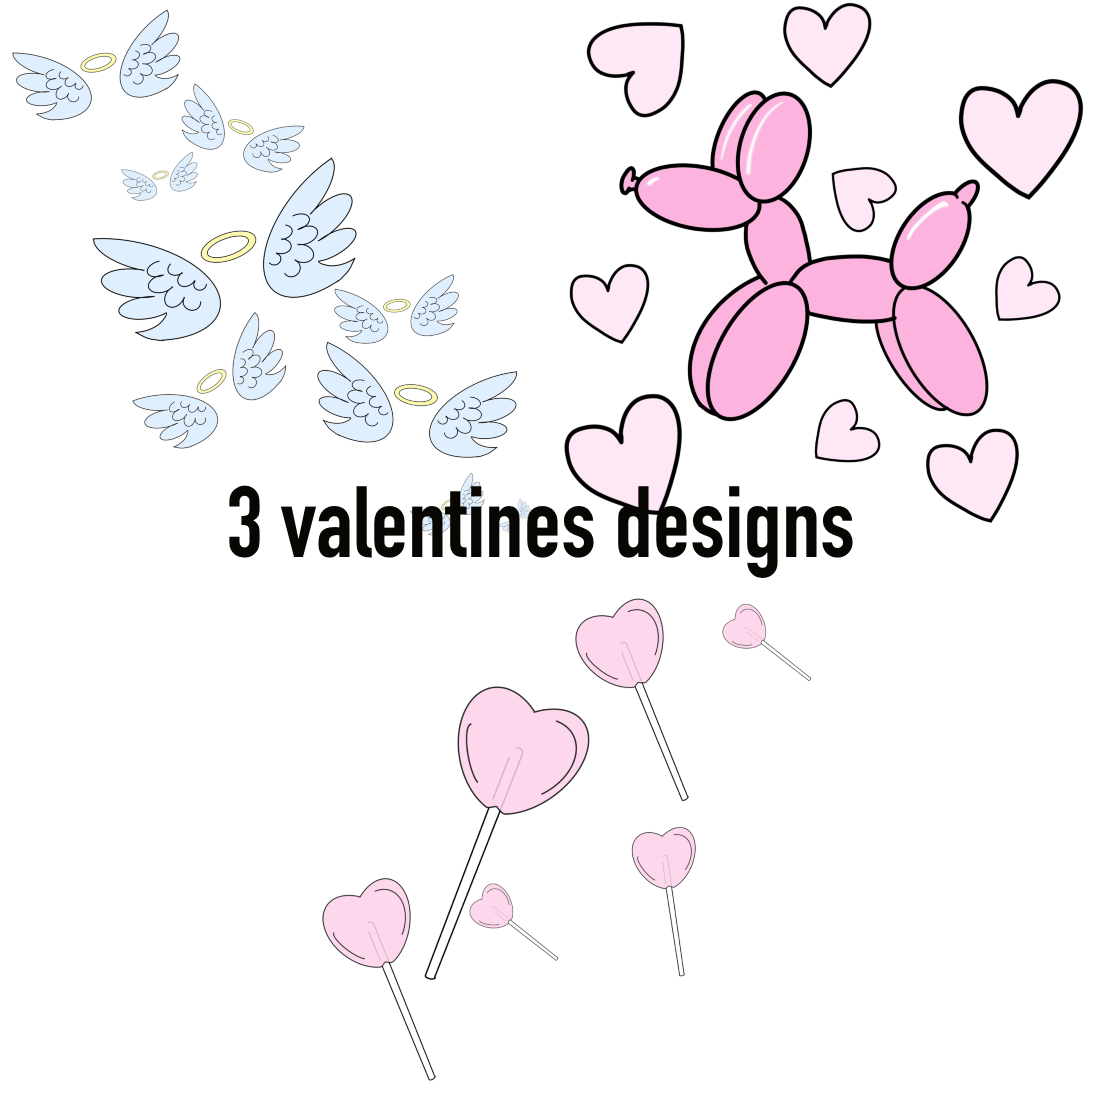 Get a set of Valentines graphics templates celebrating love and add a special holiday mood to your works.